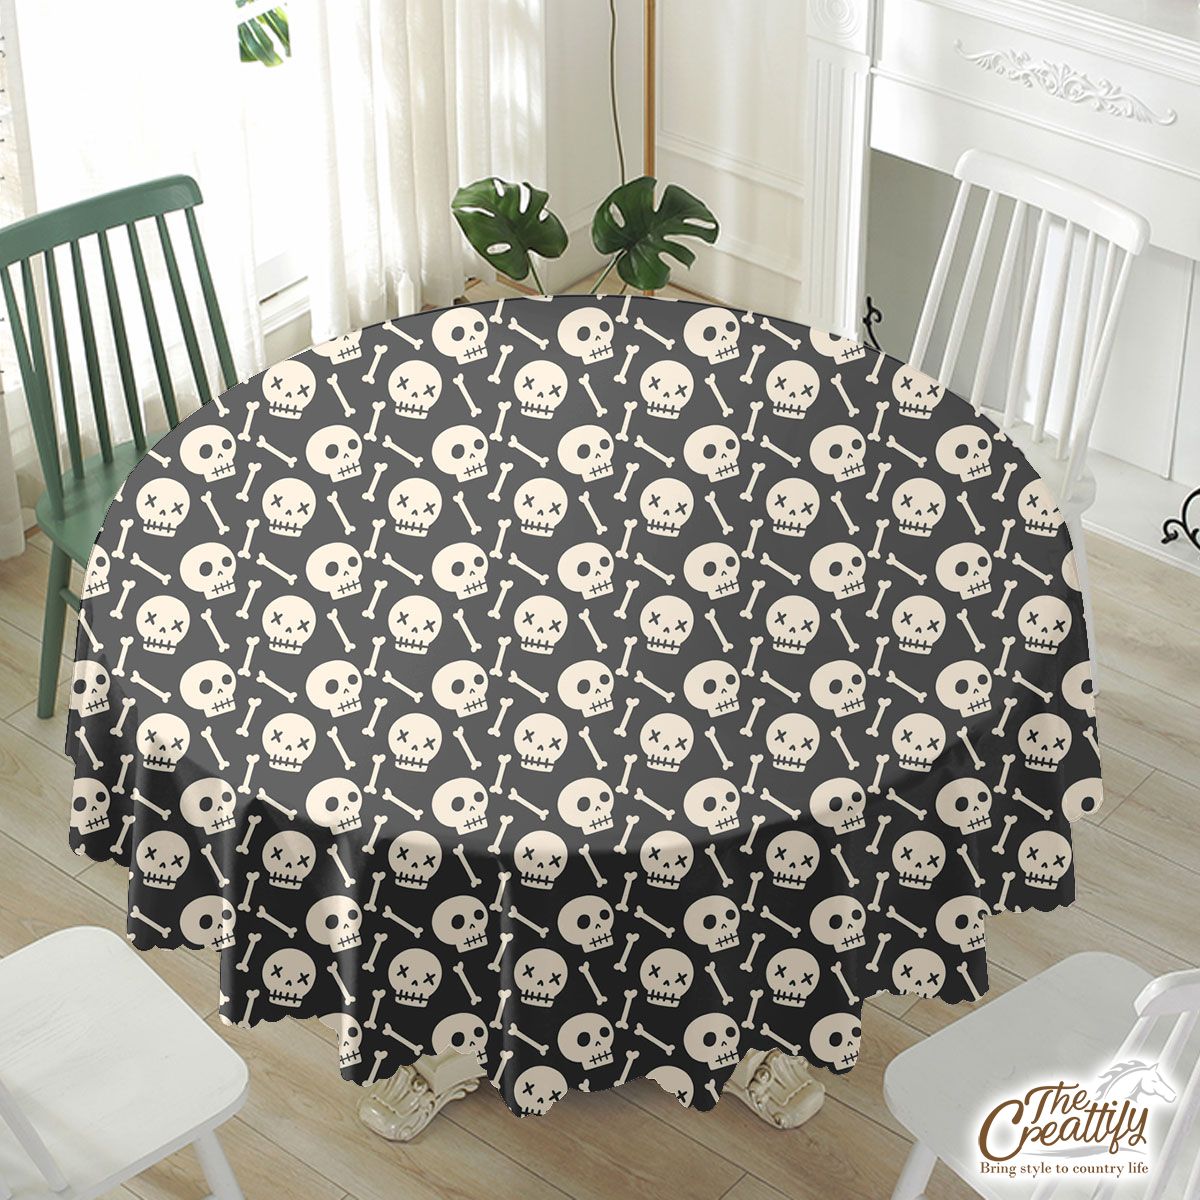 Black And White Halloween Skull And Bones Waterproof Tablecloth